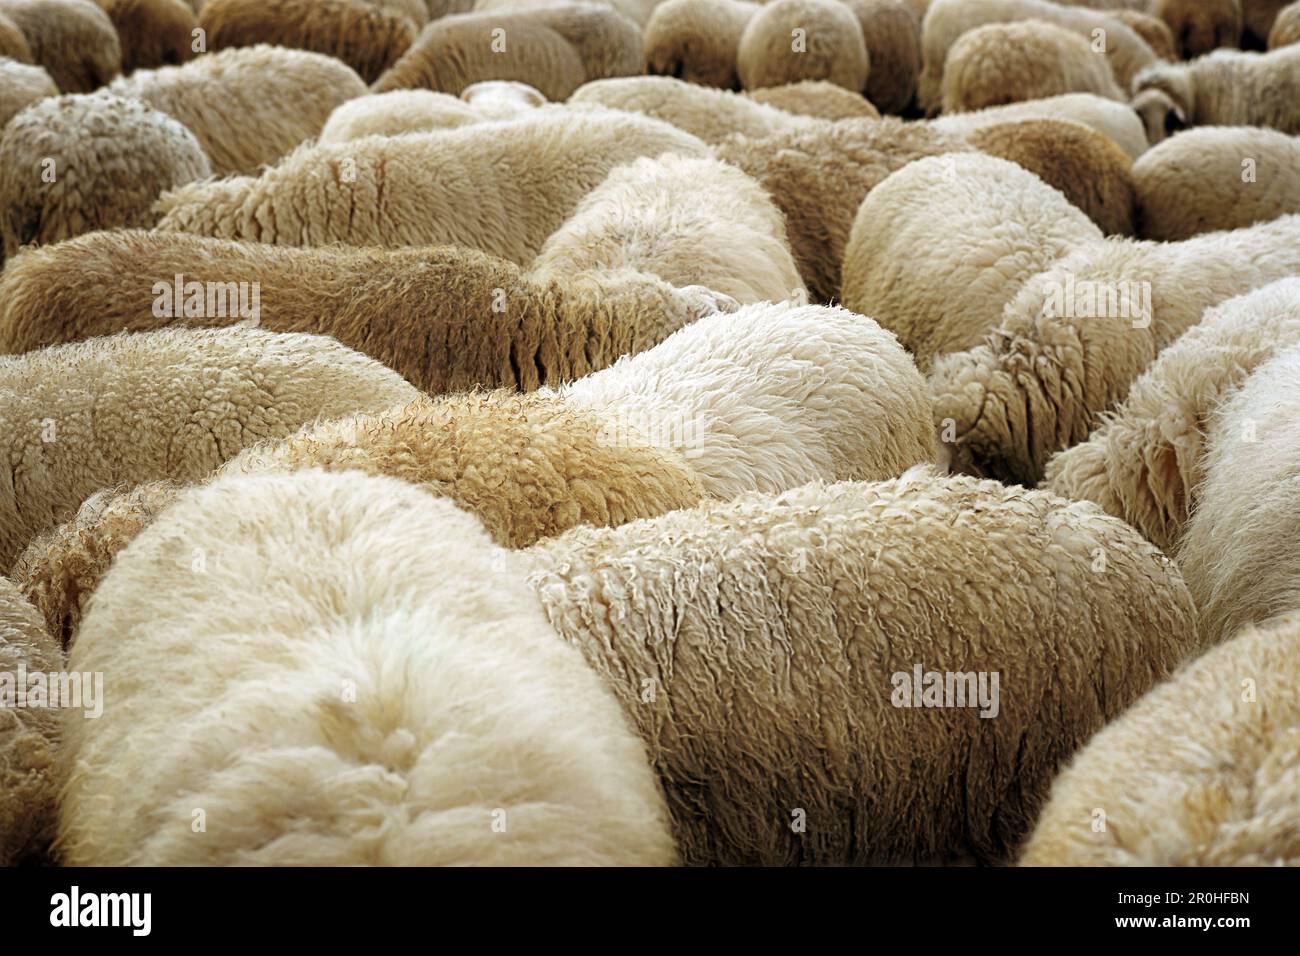 domestic sheep (Ovis ammon f. aries), standing densly together, Germany Stock Photo